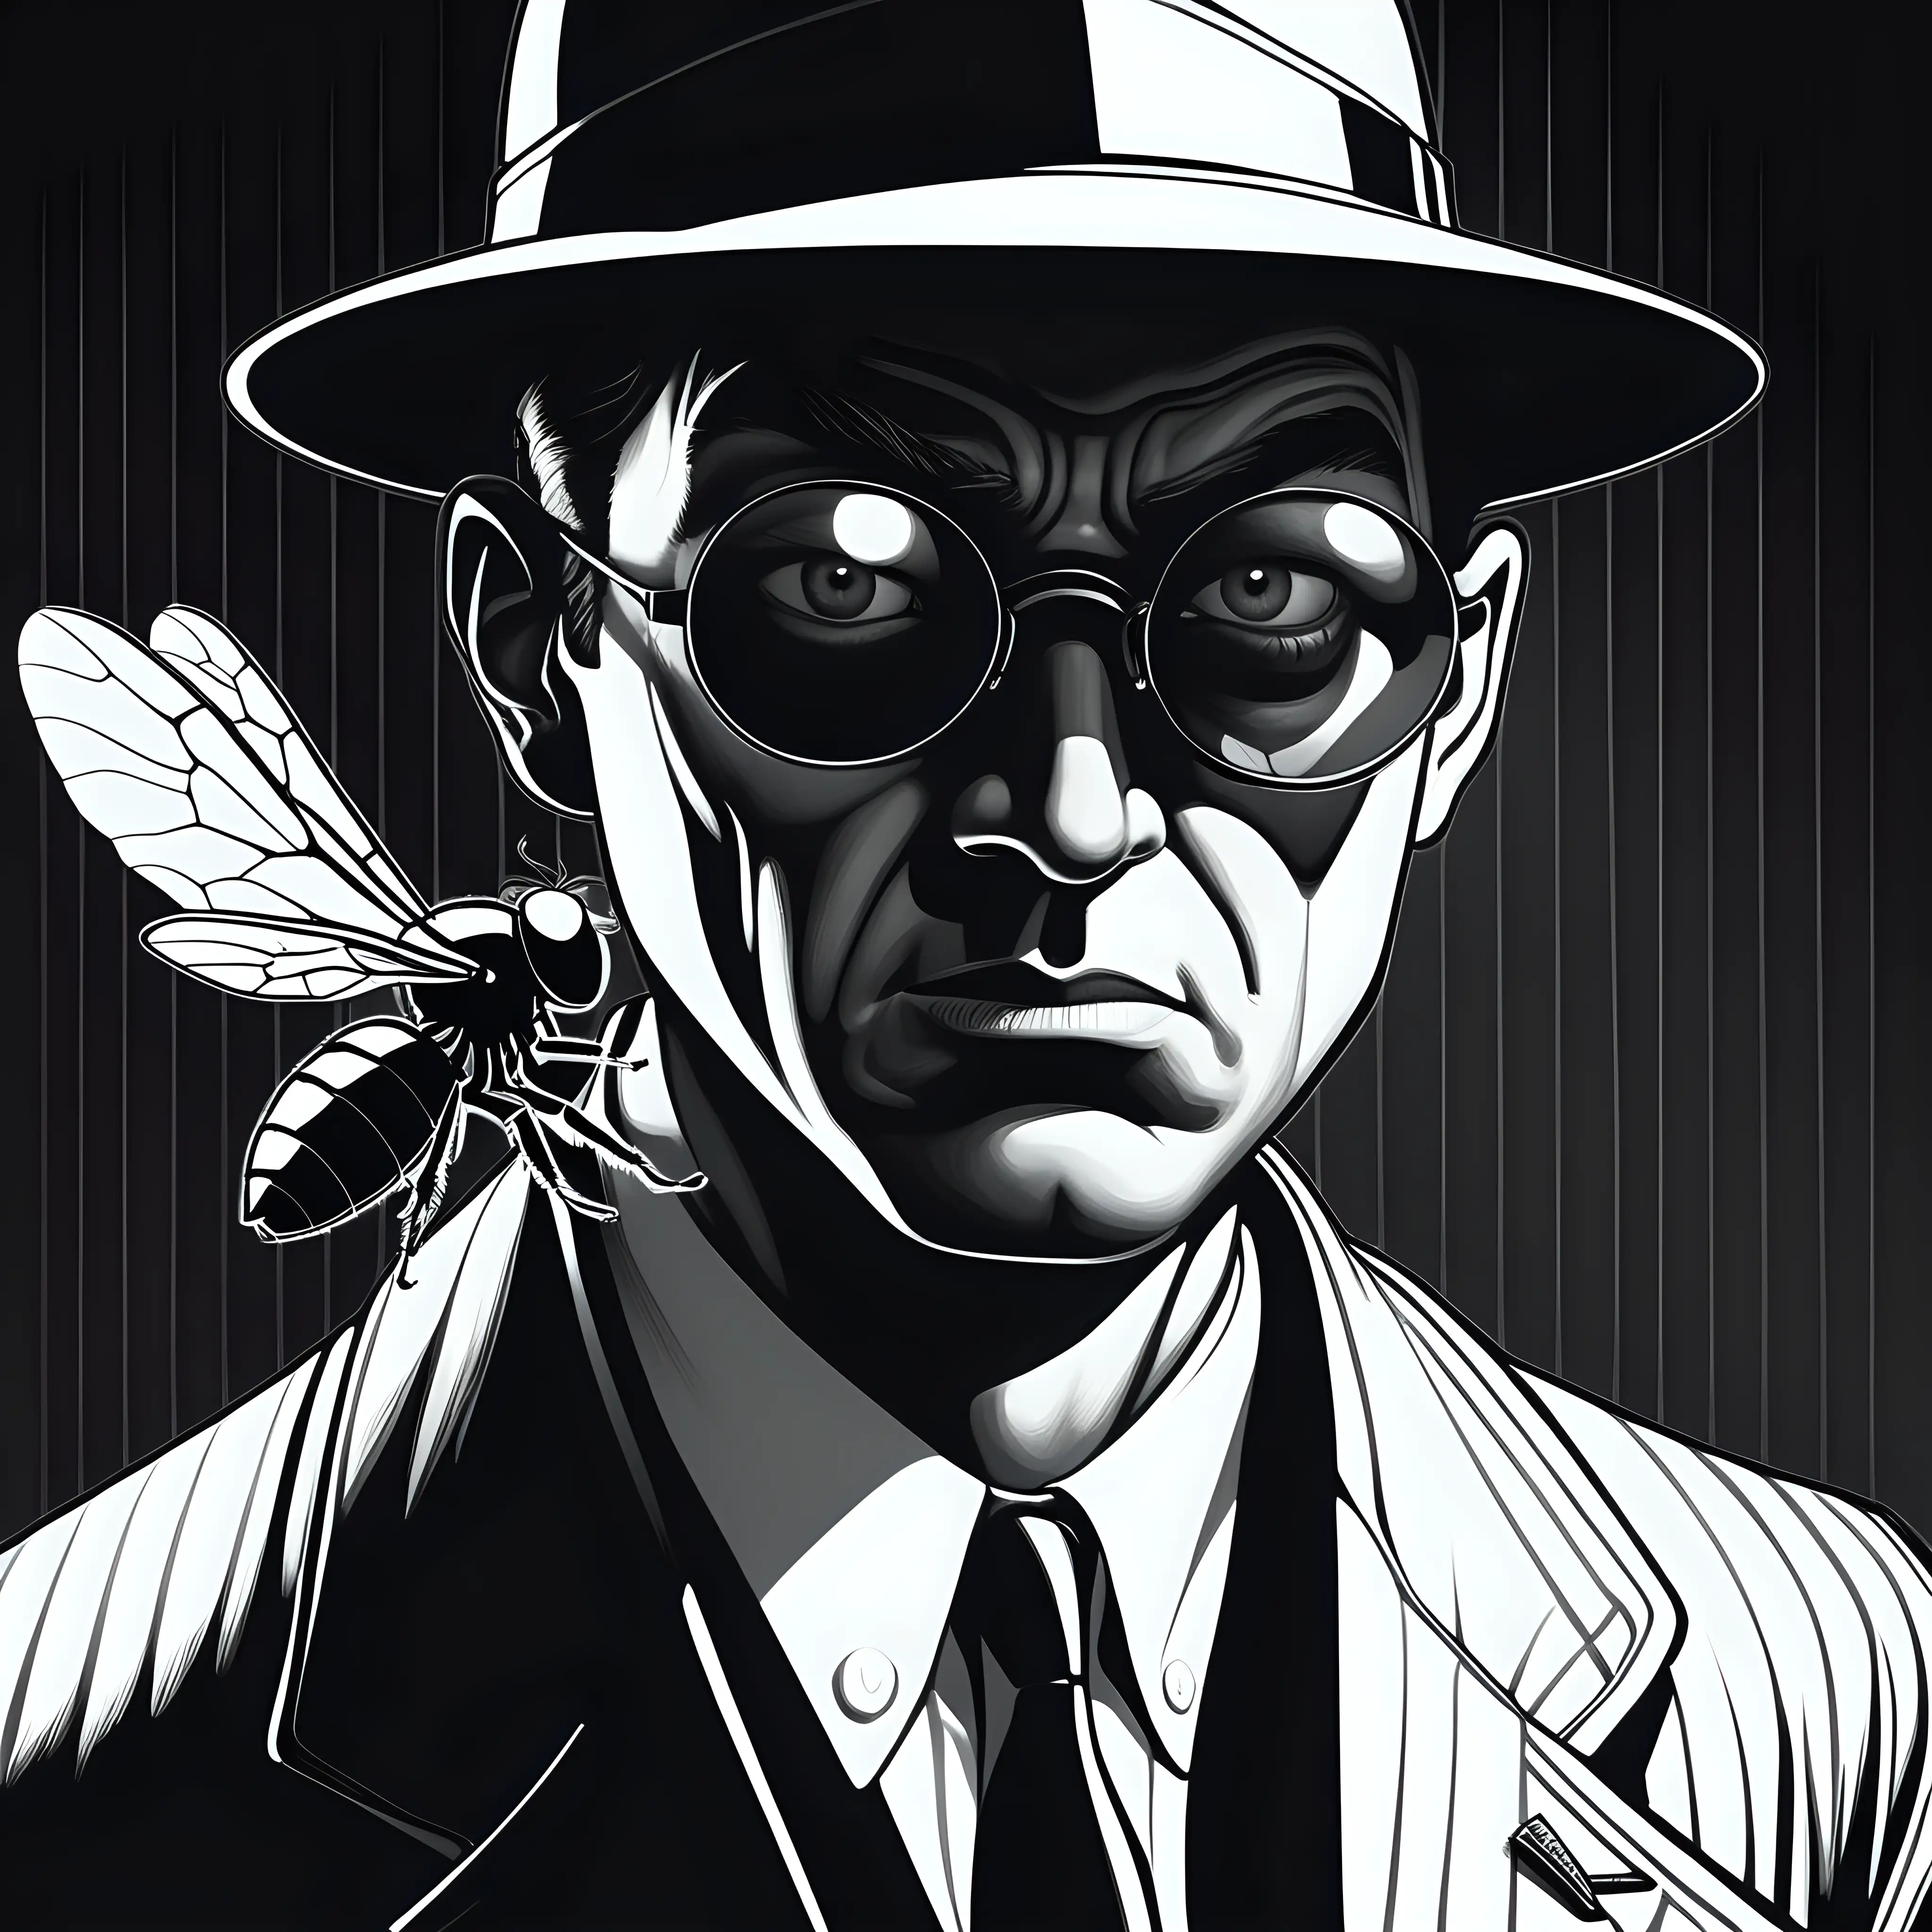 Create a spy movie character with the face of a fly in a noir graphic novel style